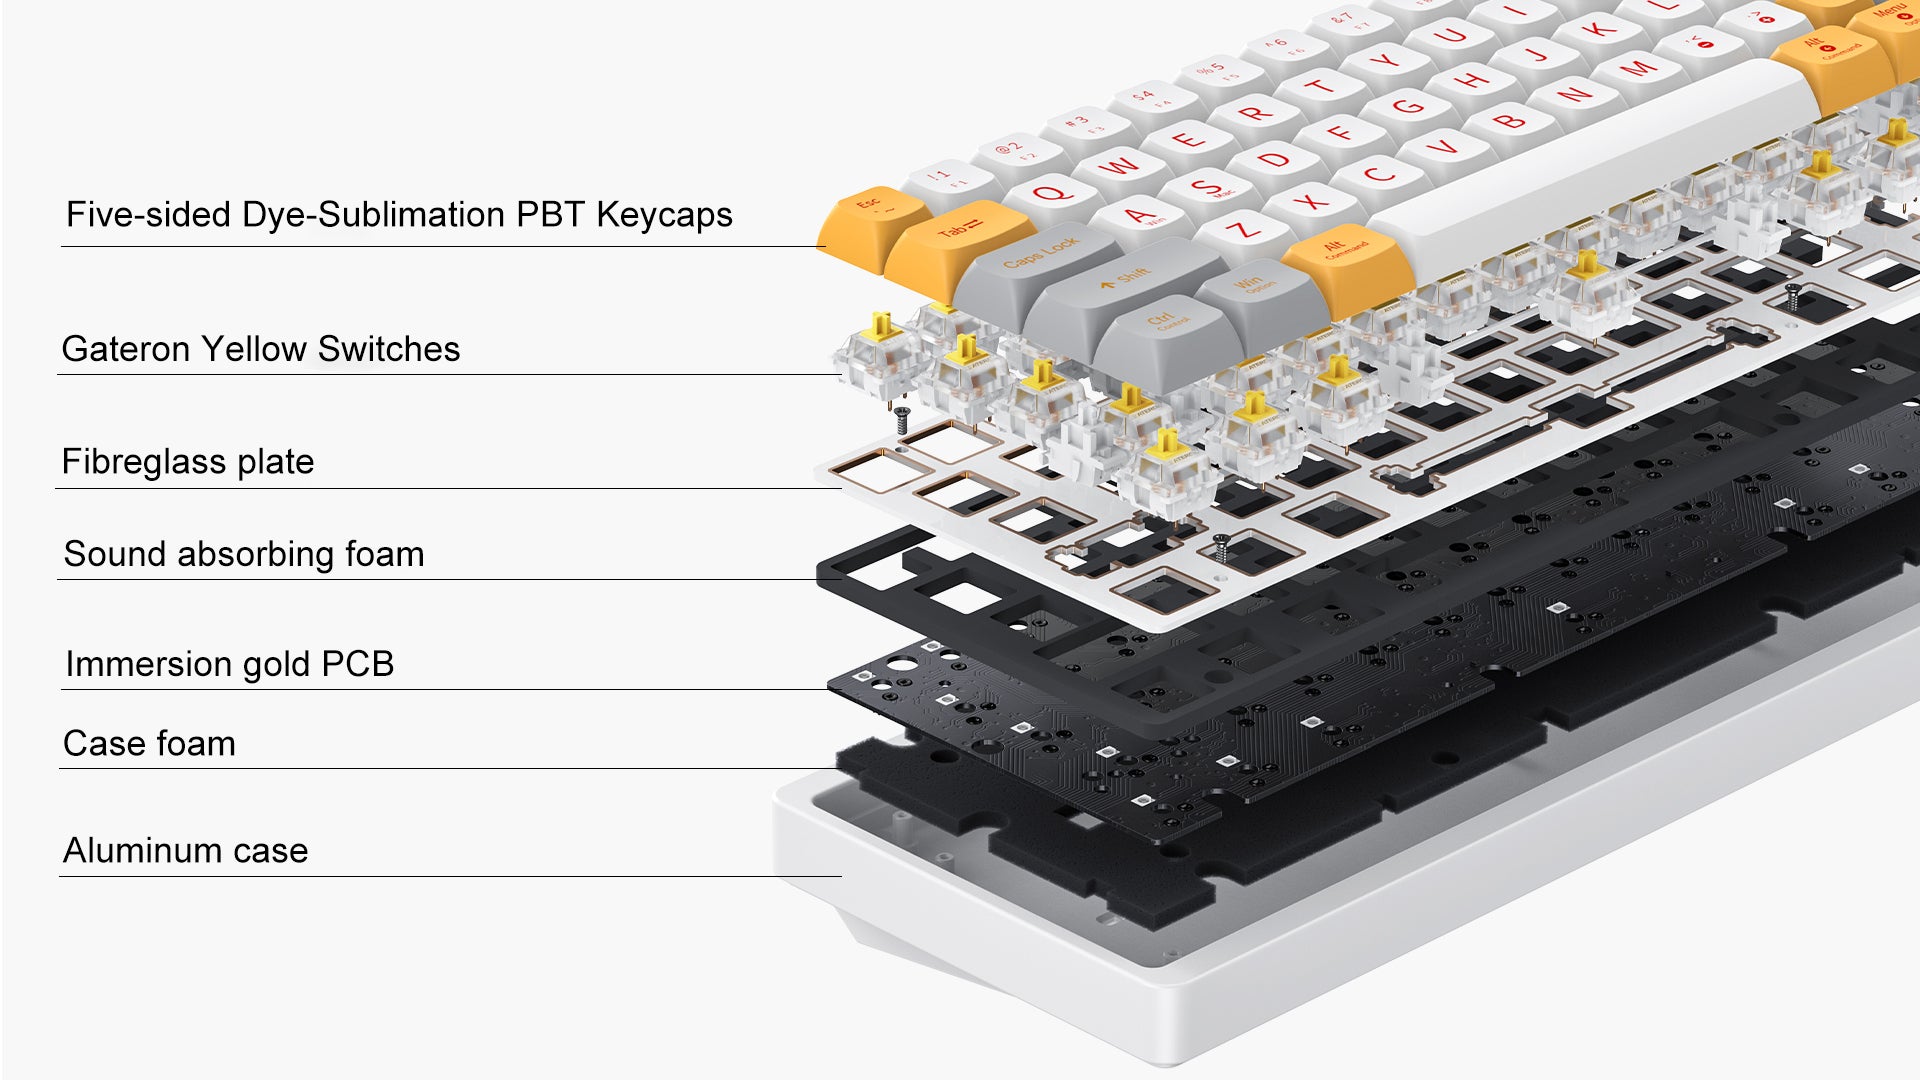 C641 mechanical keyboard - exploded view